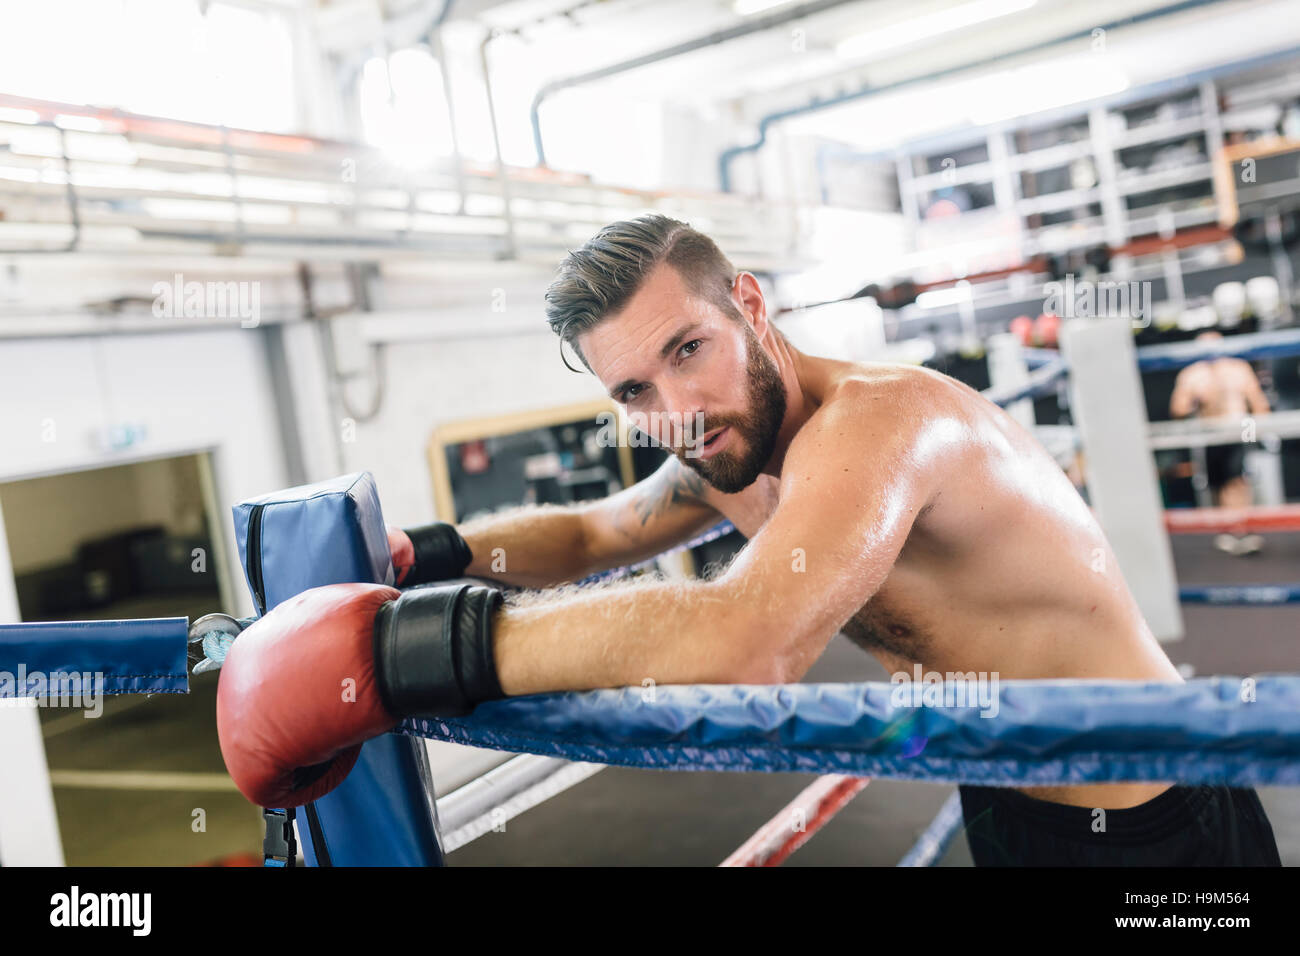 Boxer resting in boxing ring Stock Photo